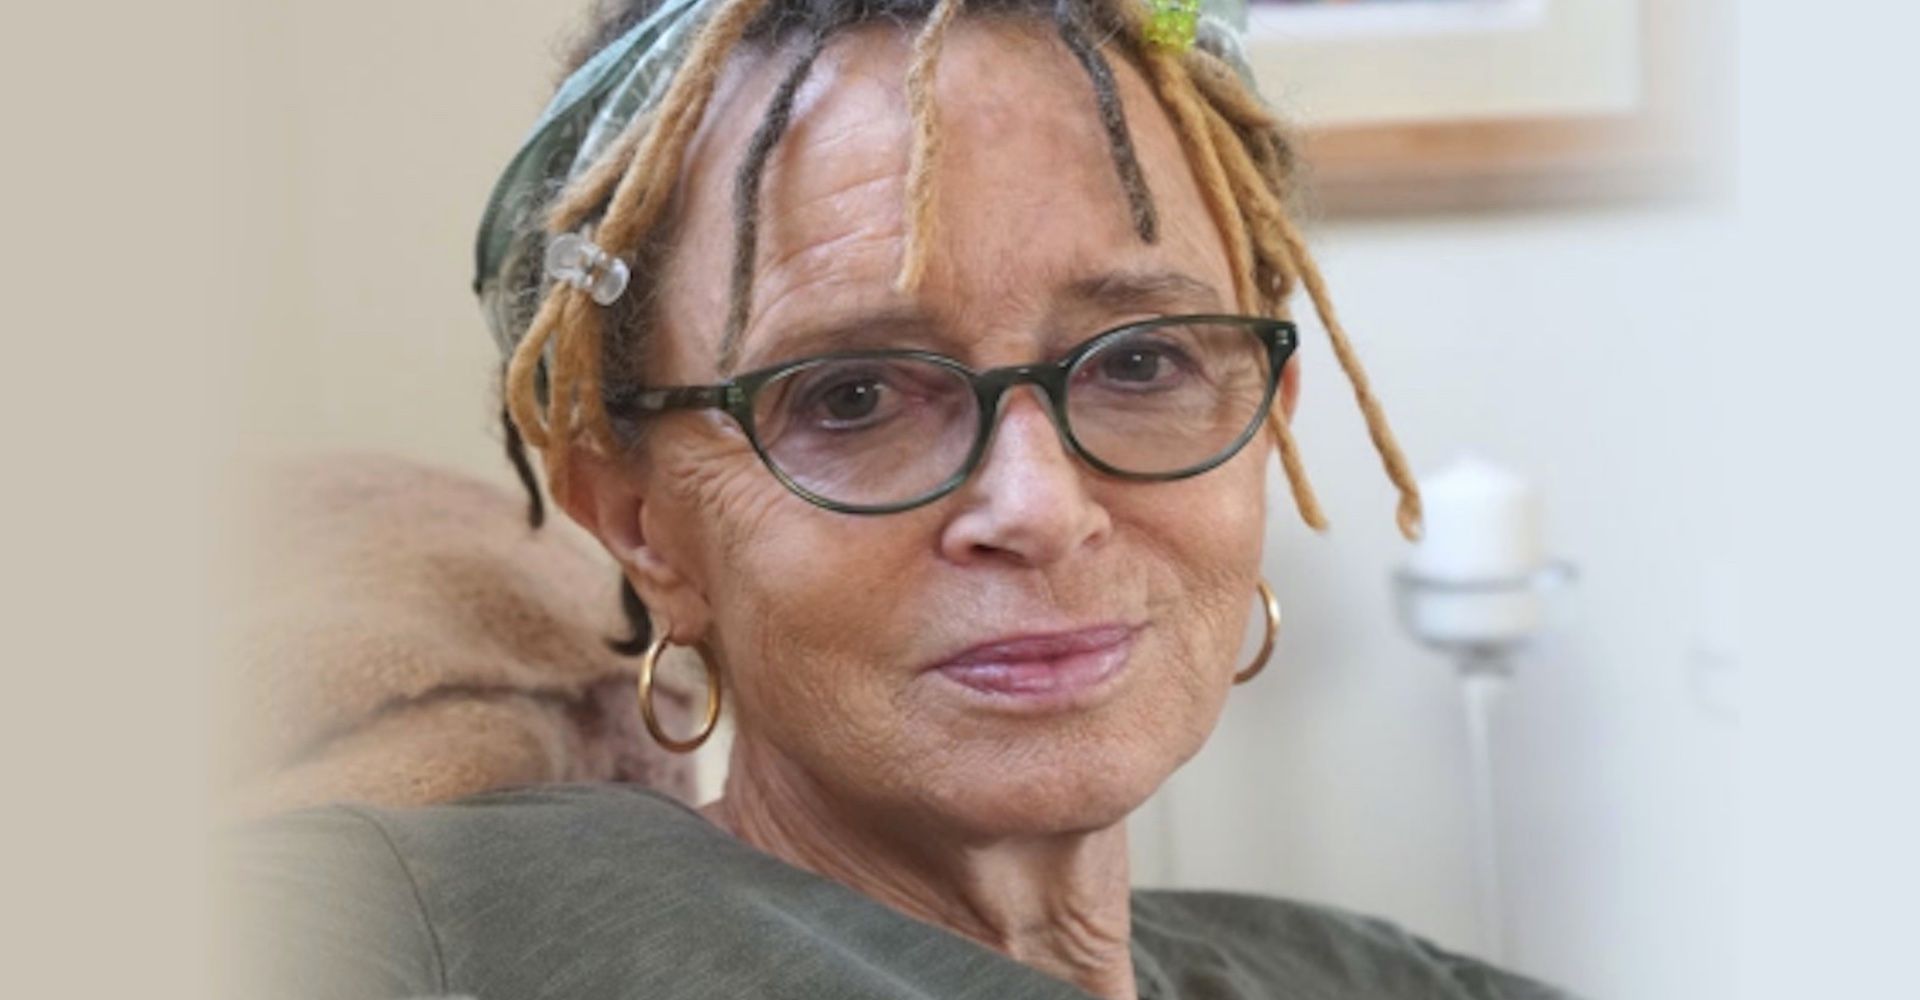 Anne Lamott Just Turned 68. Here’s How She Wants You to Help Her Celebrate